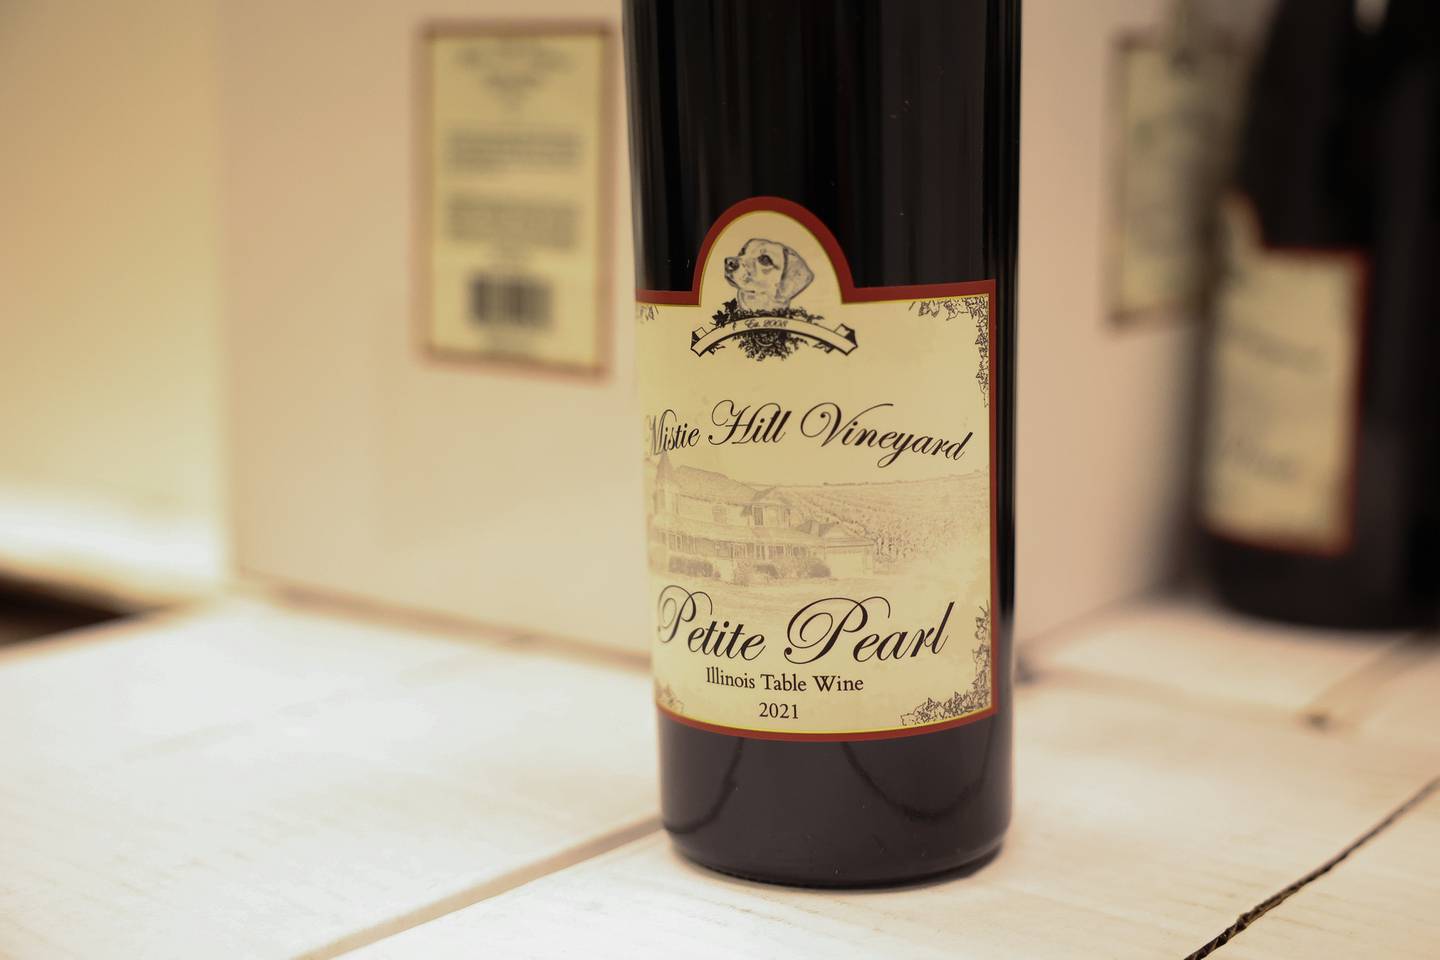 Mistie Hill Vineyard’s Petite Pearl recently won the Double Gold Best in Class at at Illinois wine competition.